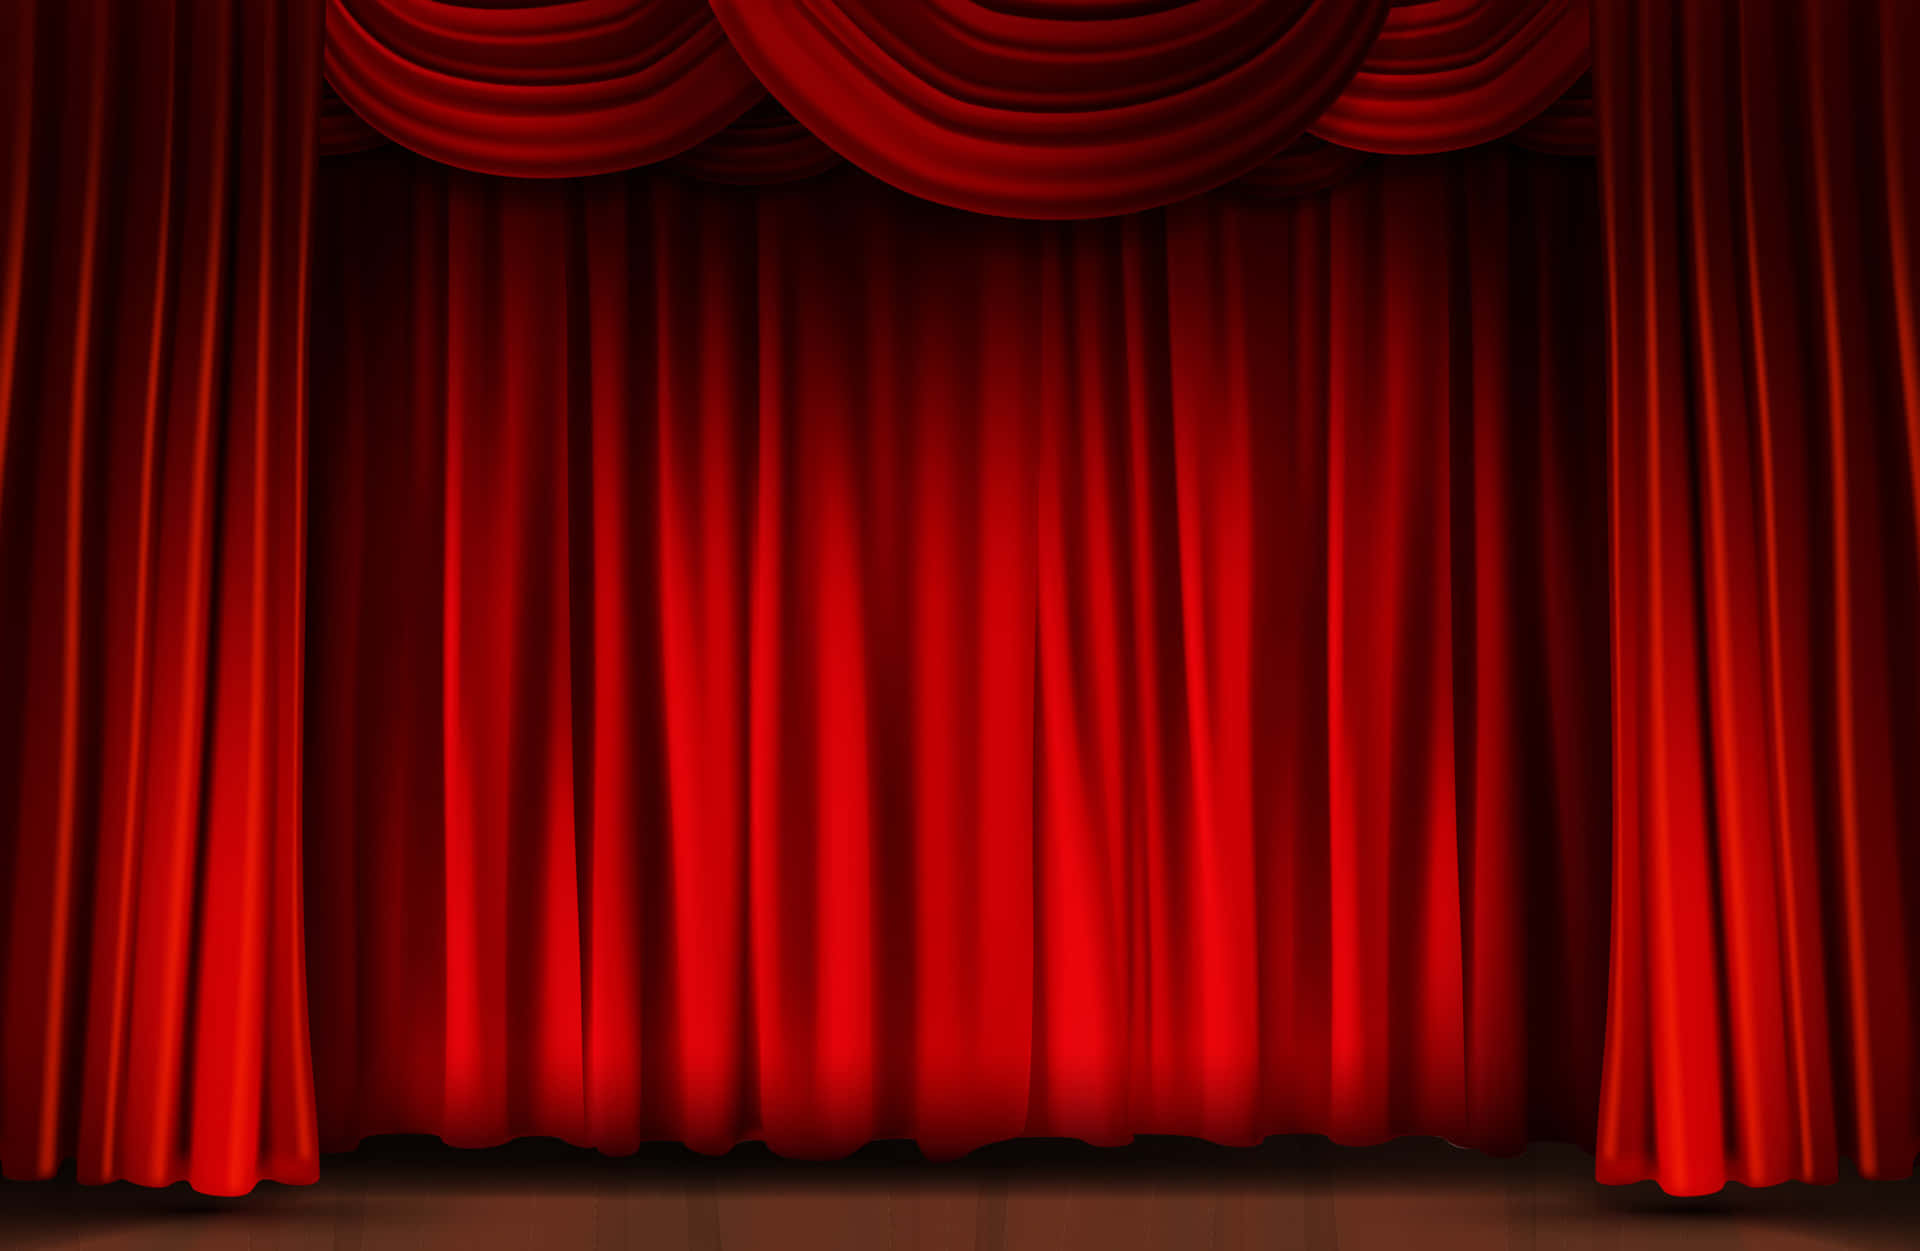 Red Curtain With A Wooden Floor And A Wooden Stage